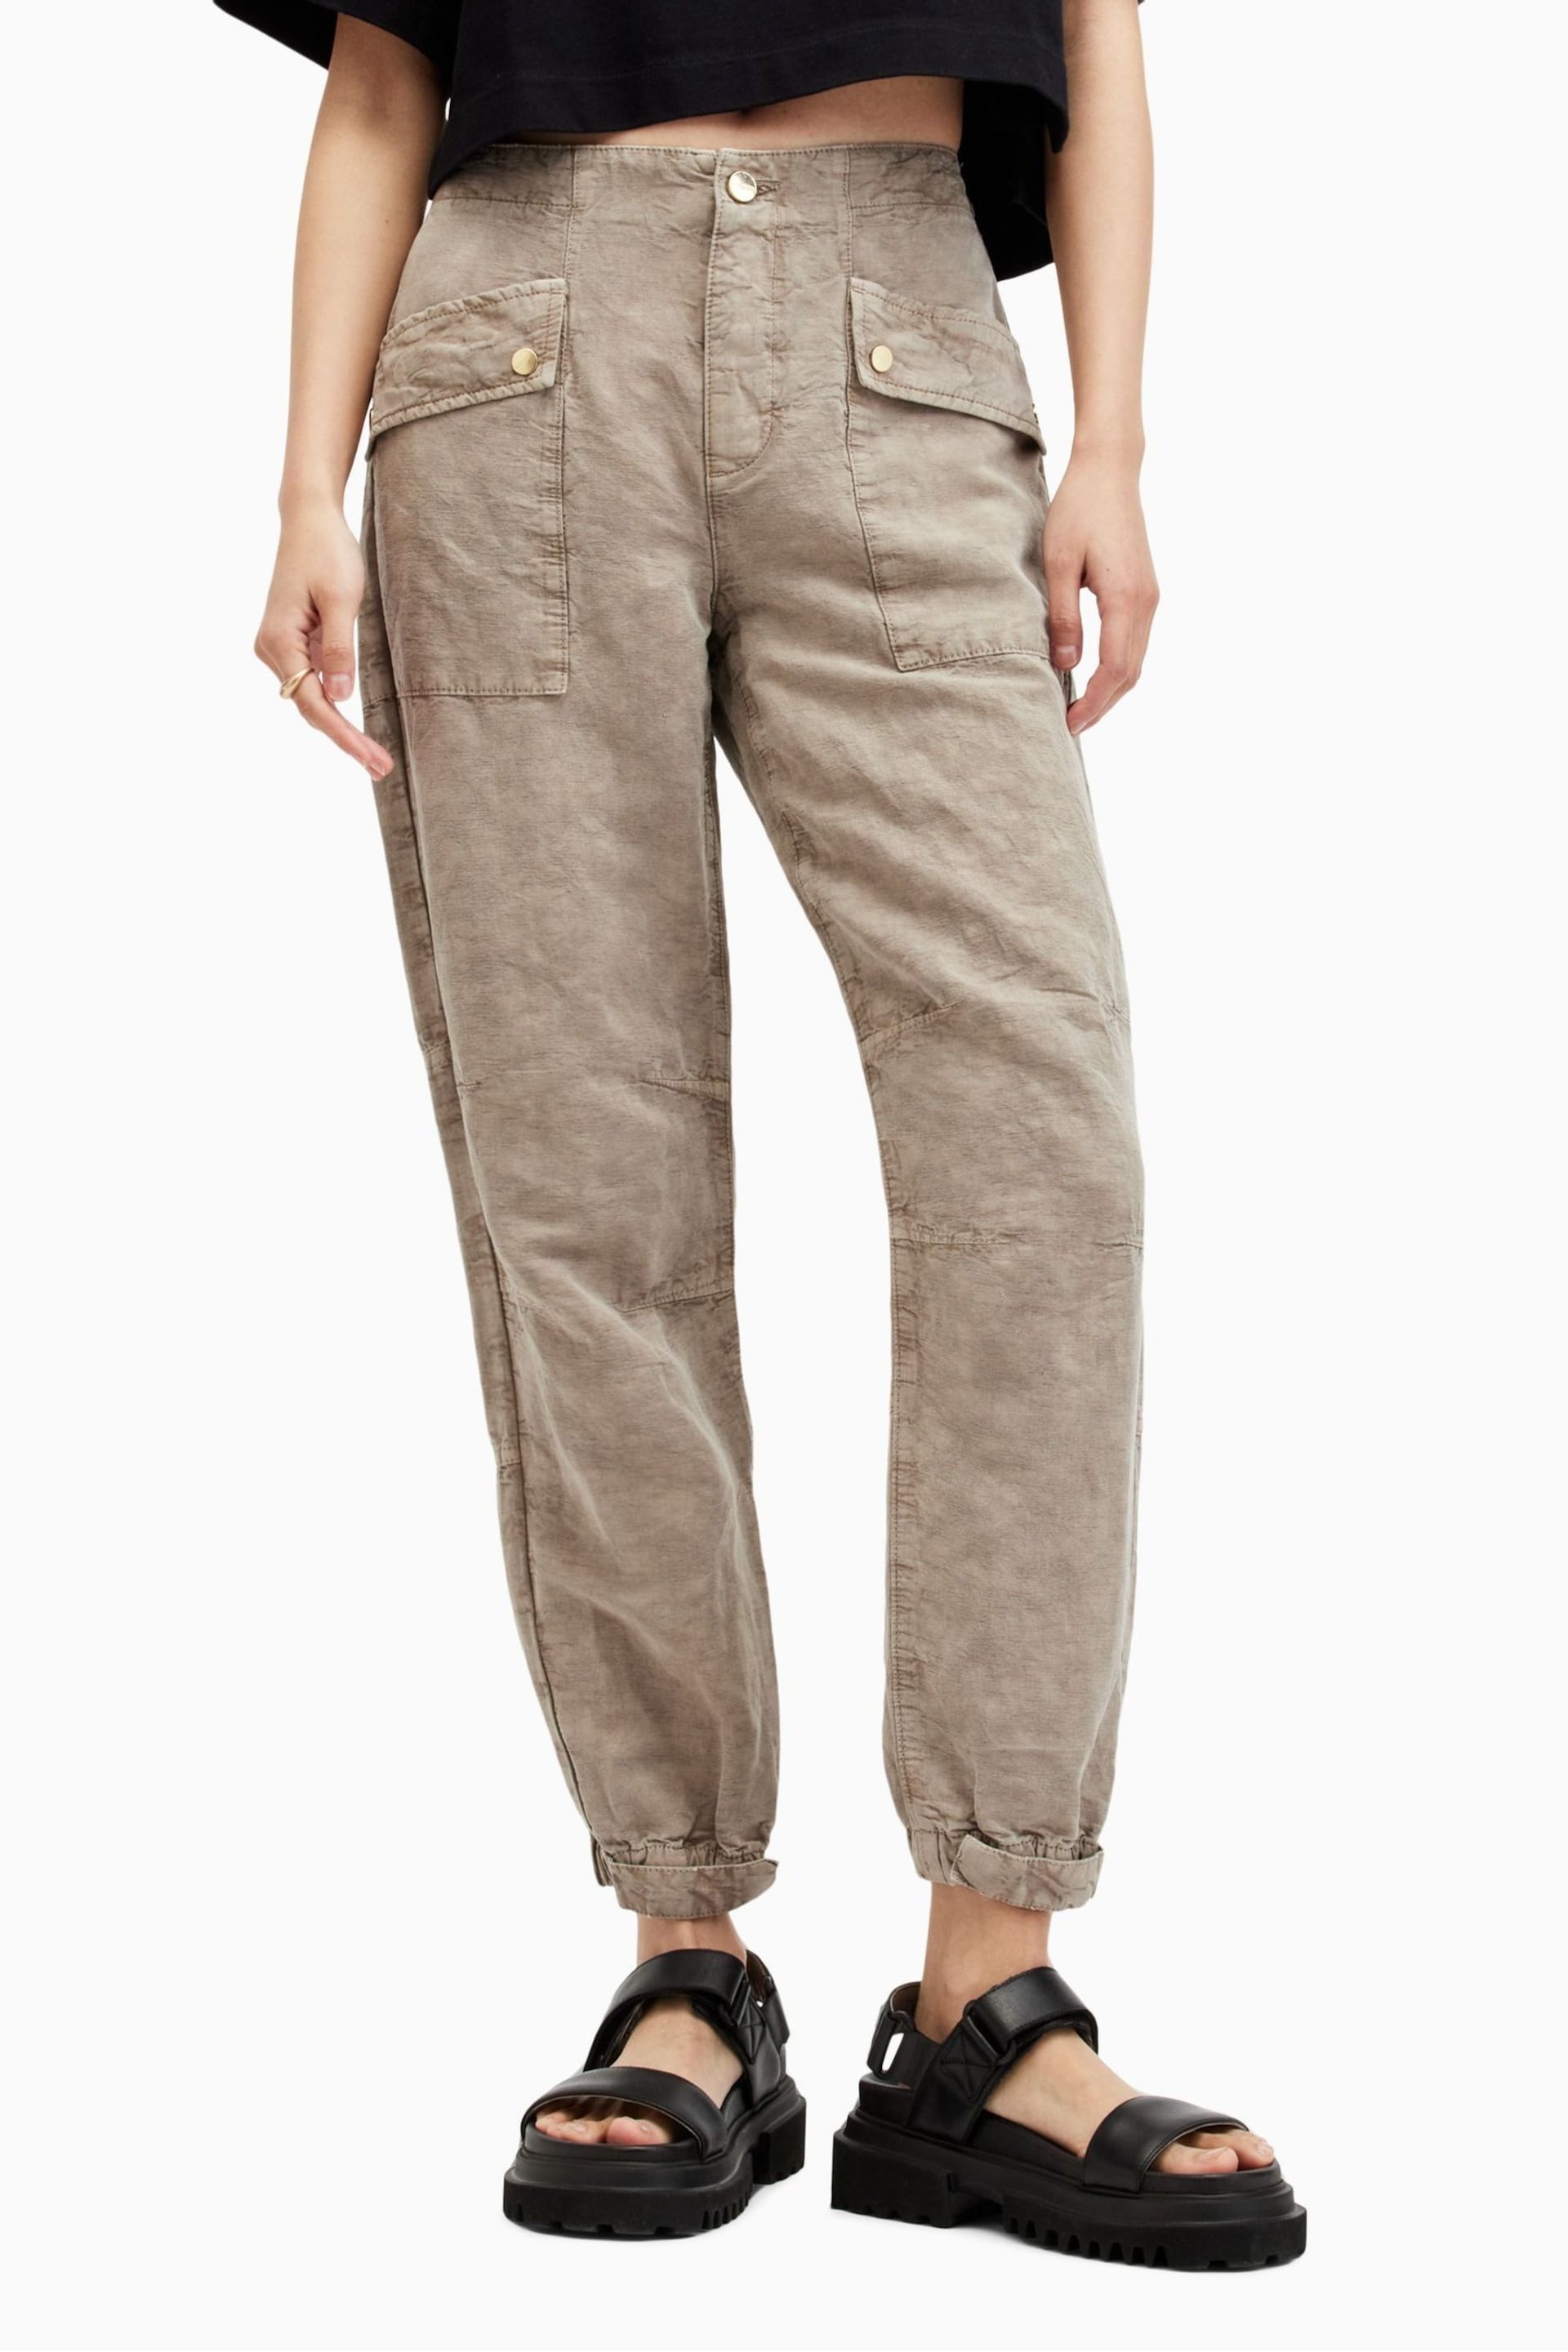 AllSaints Nude Val Trousers - Image 2 of 8